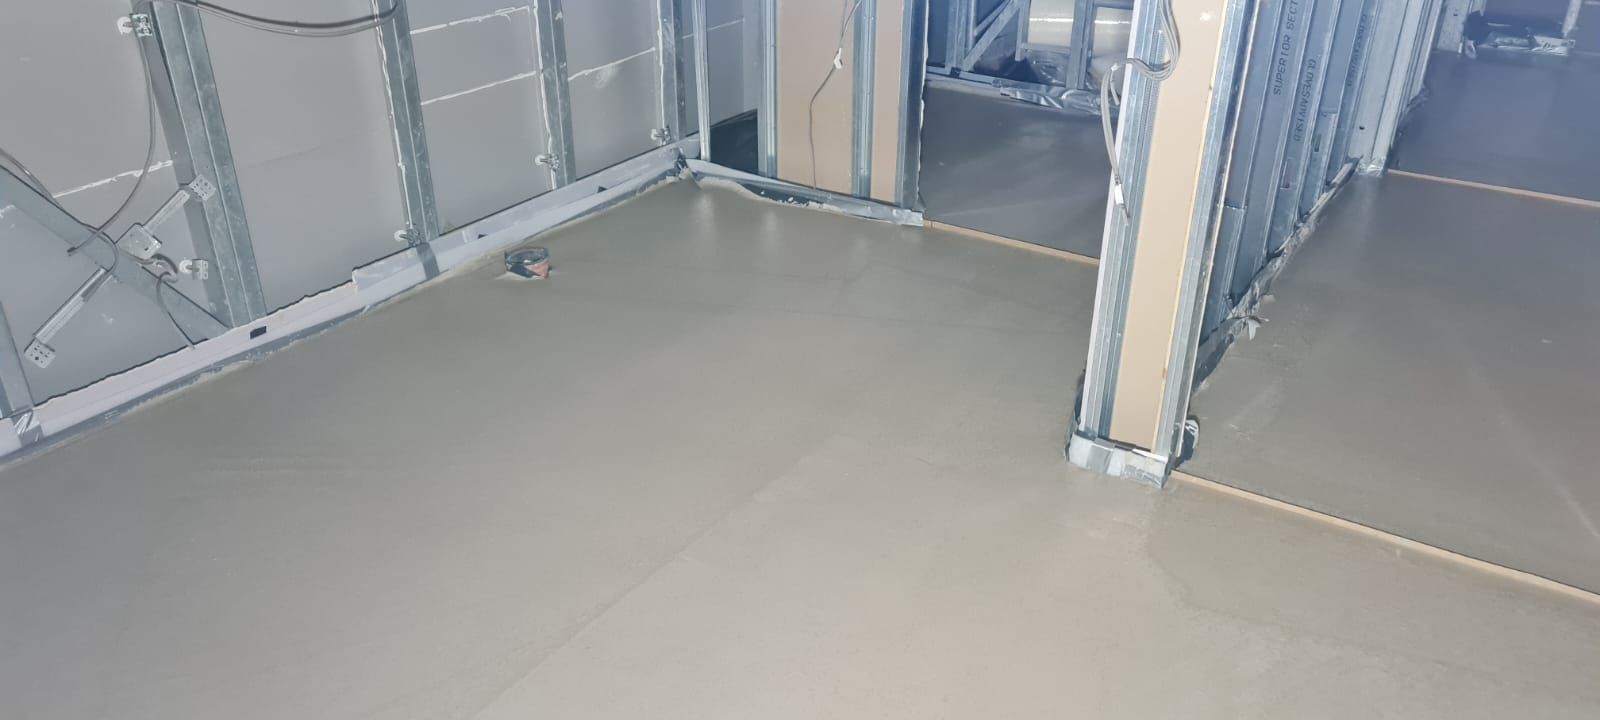 Floor screeding contract for park view apartments, Chorley